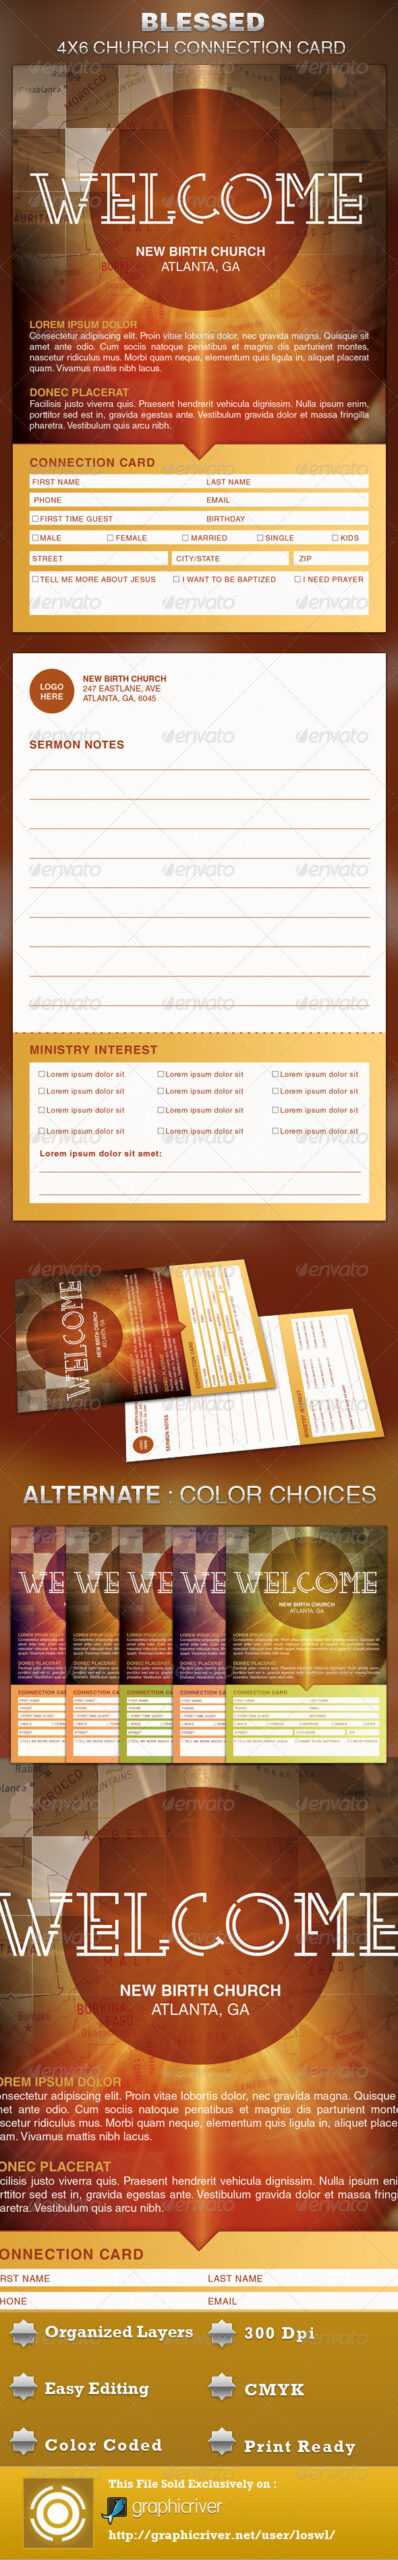 The Blessed Church Connection Card Template Is Great For Any Regarding Decision Card Template